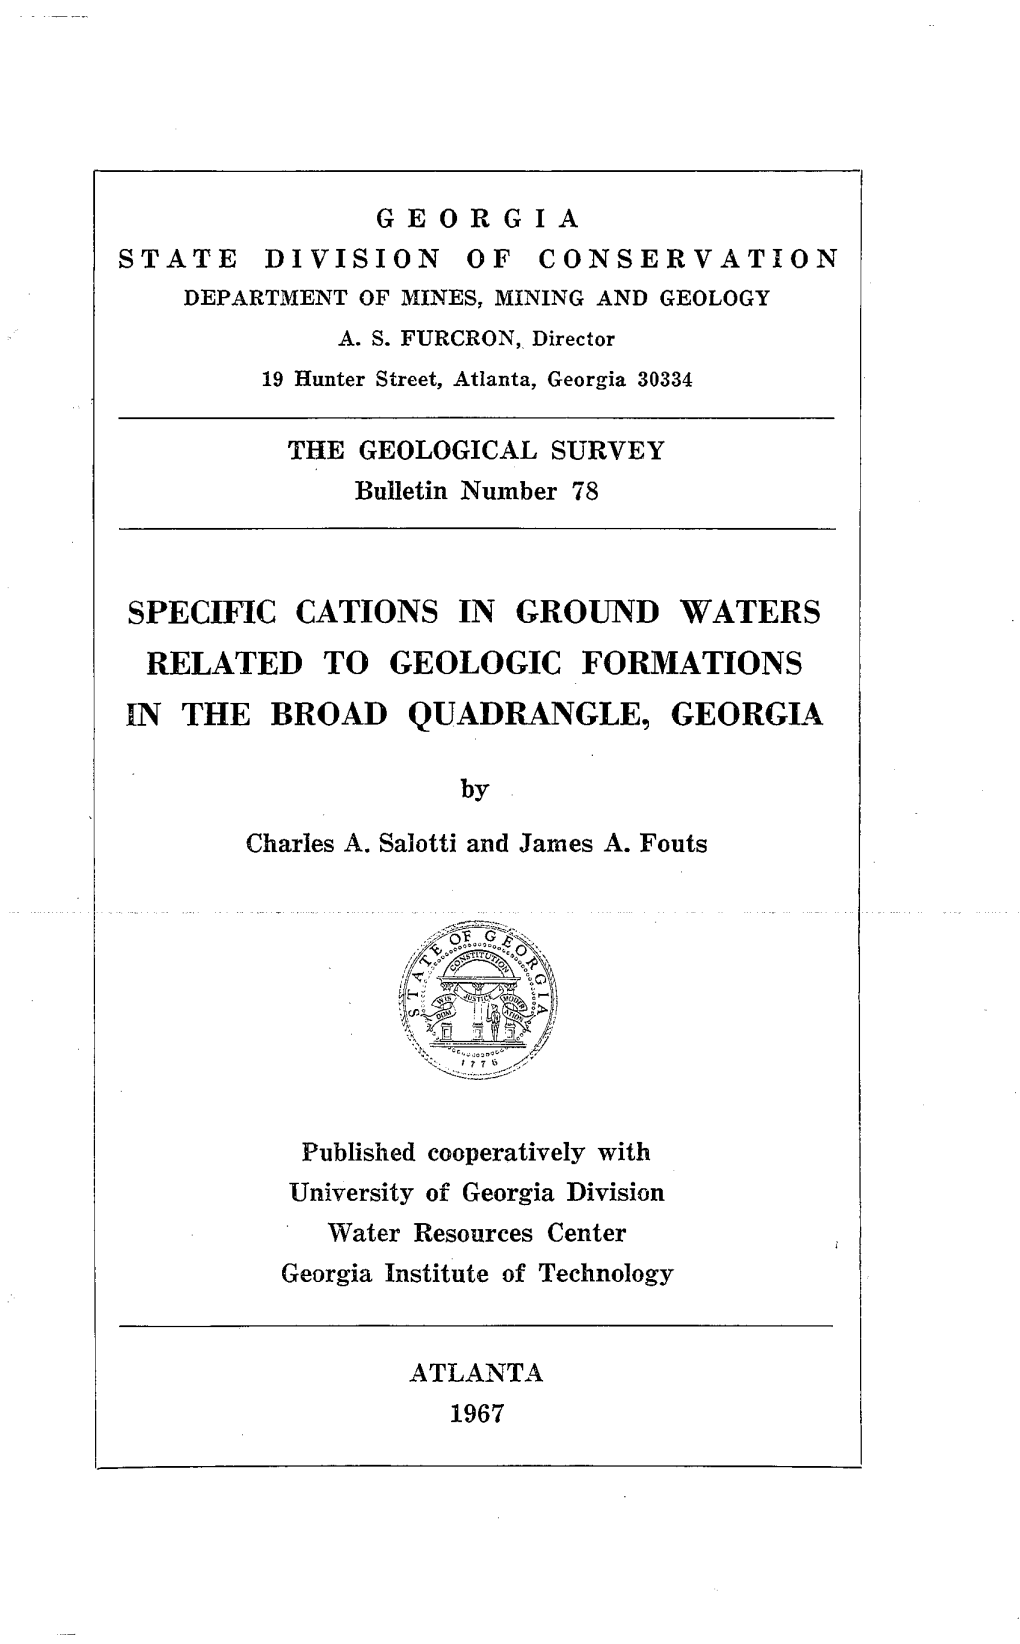 Specific Cations in Ground Waters Related to Geologic Formations